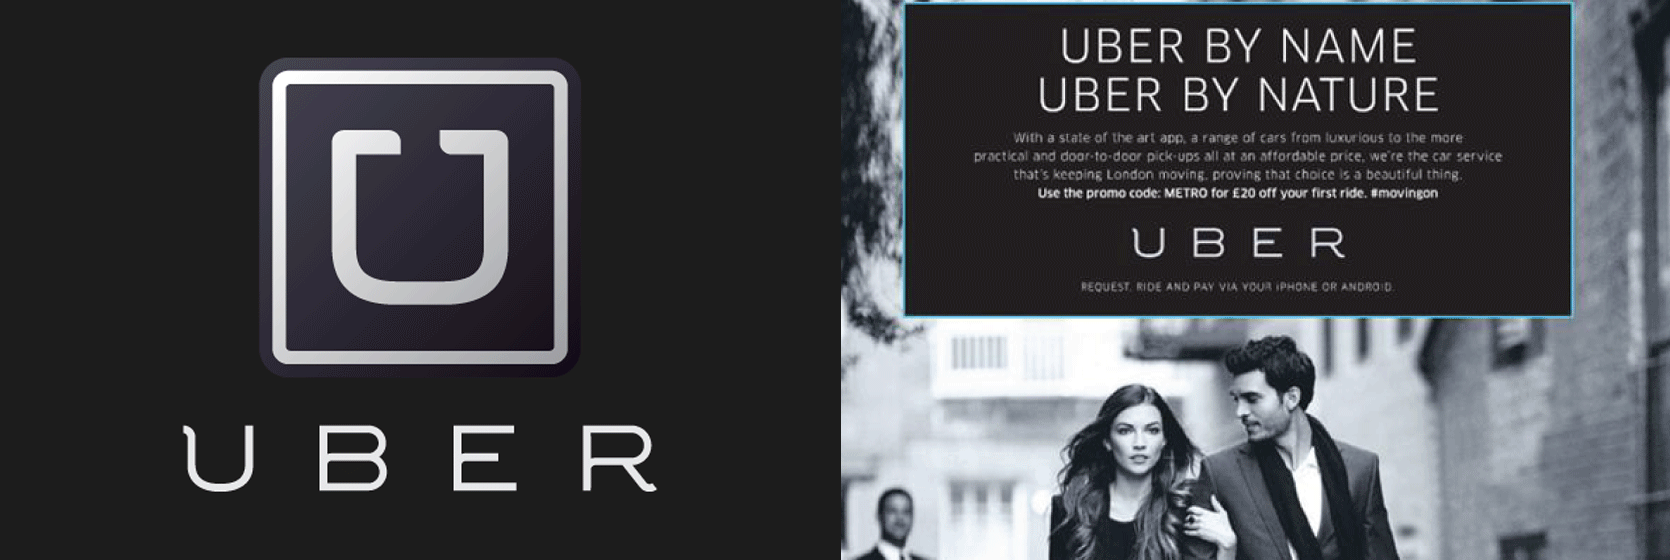 Uber Cool Logo - Landscape: Making the complex simple. 'Uber' Cool Brand Identity